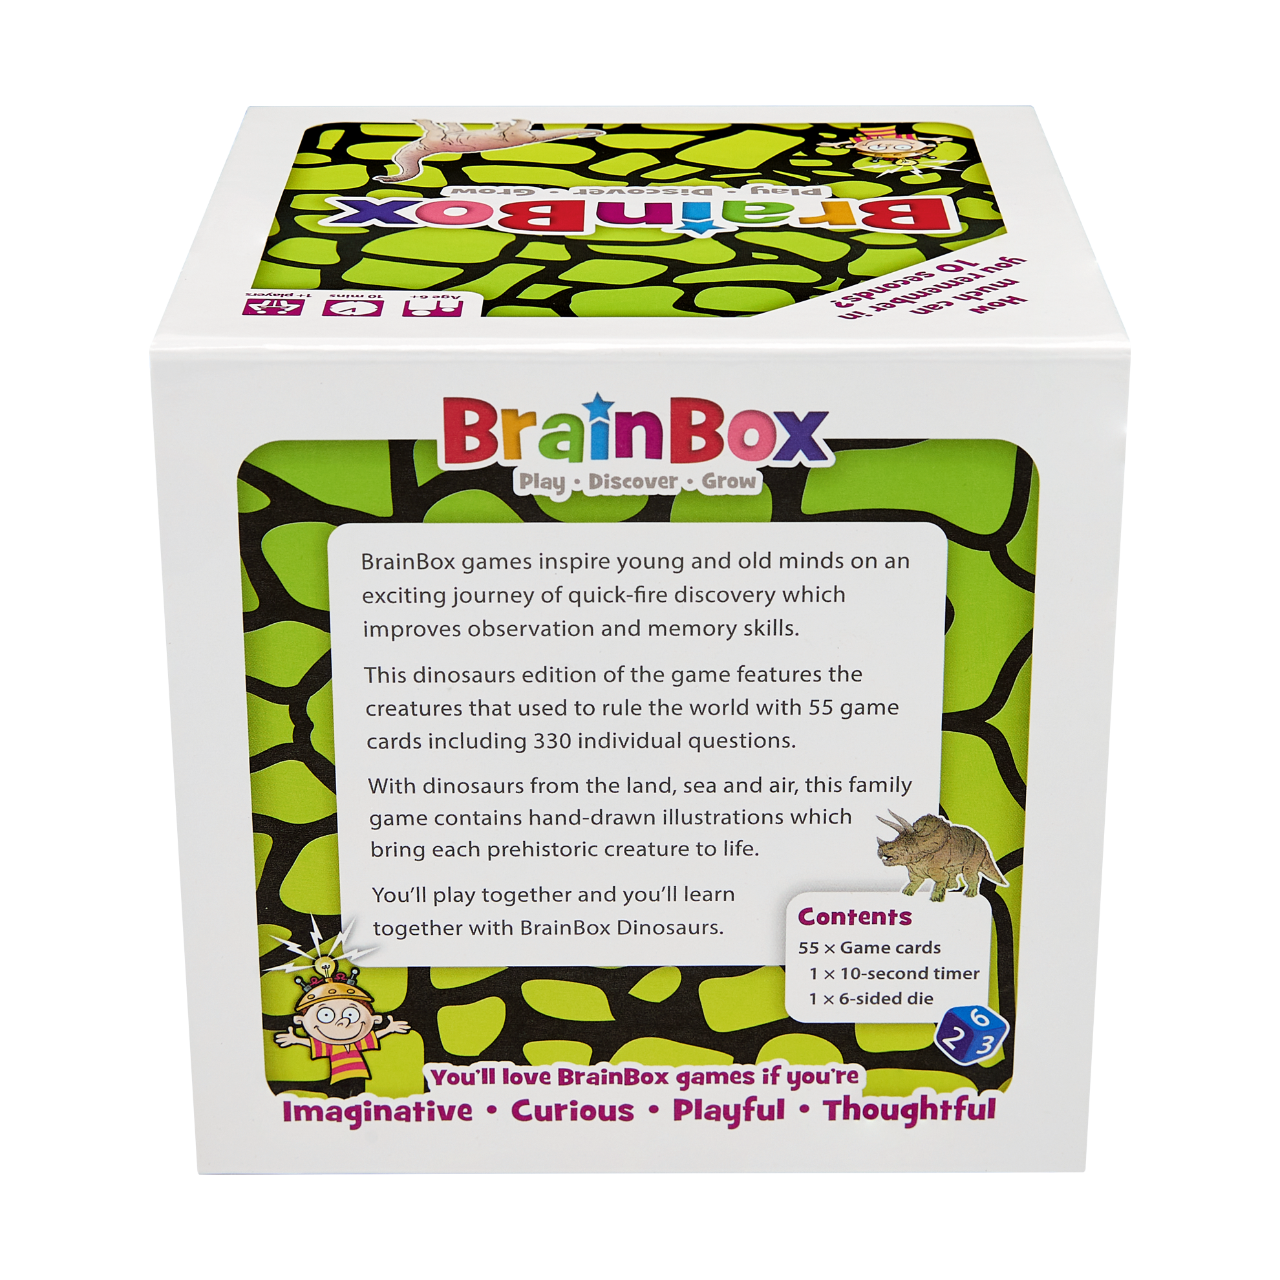 Brainbox - Dinosaurs by the Green Board Co.